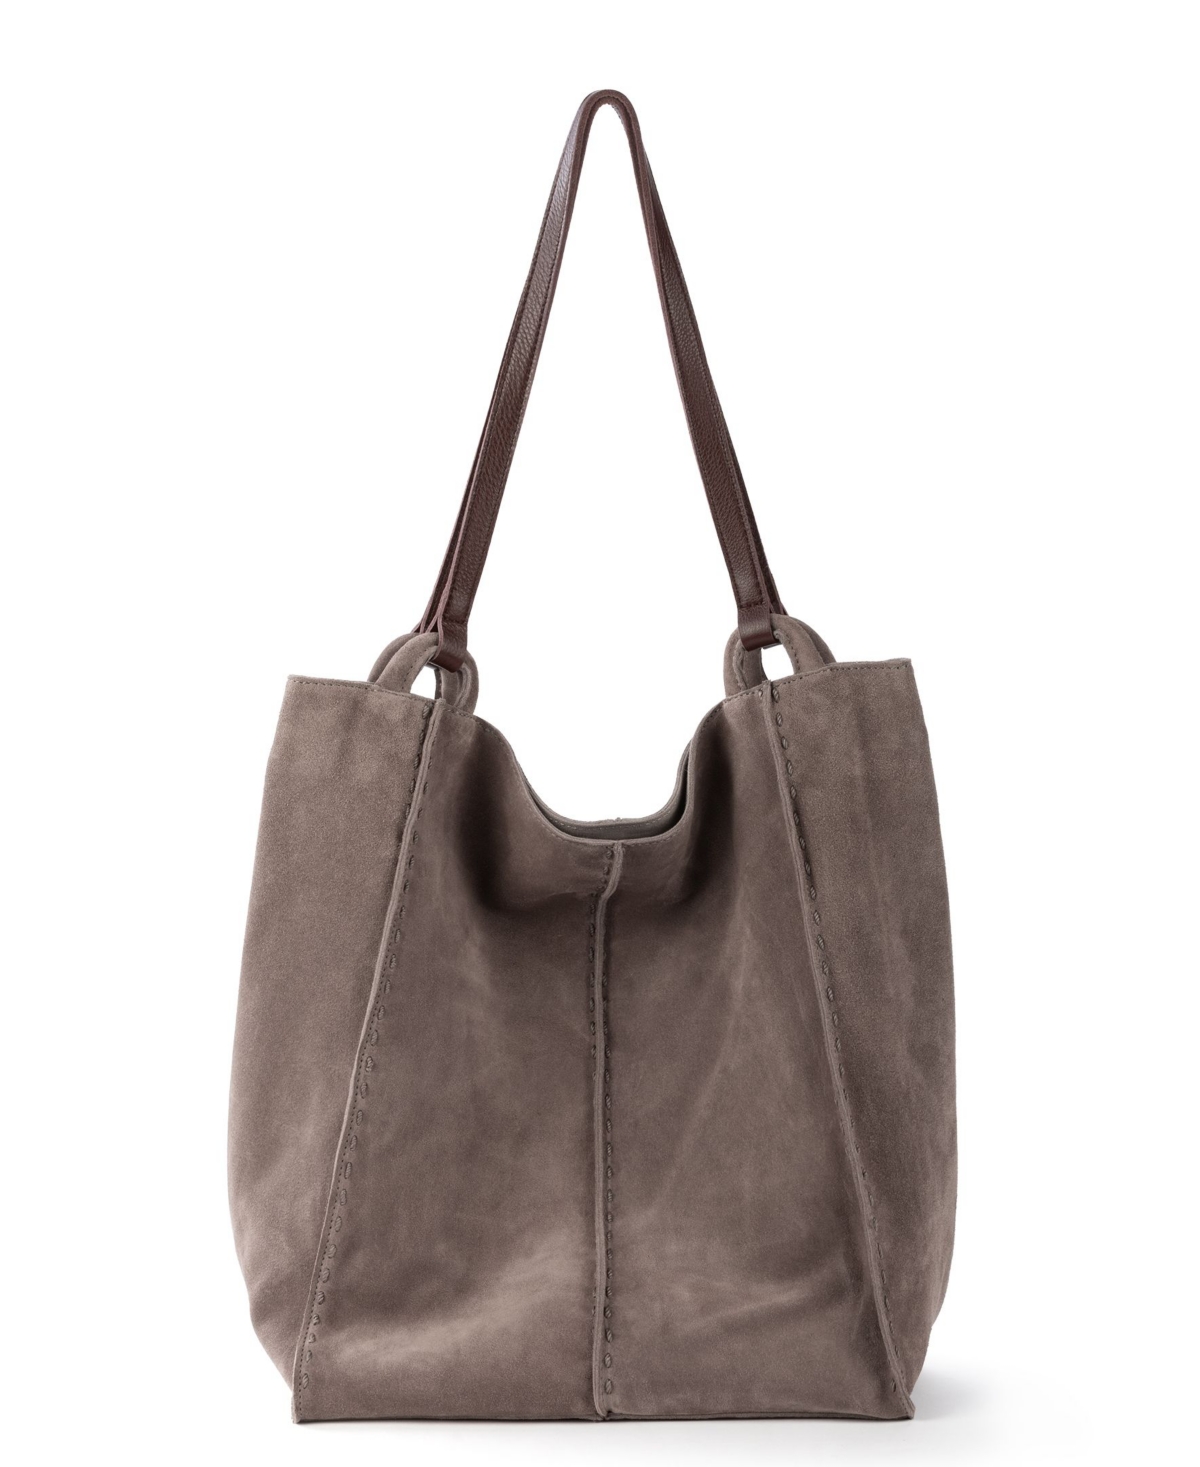 Los Feliz Leather Tall Tote - Sand Suede